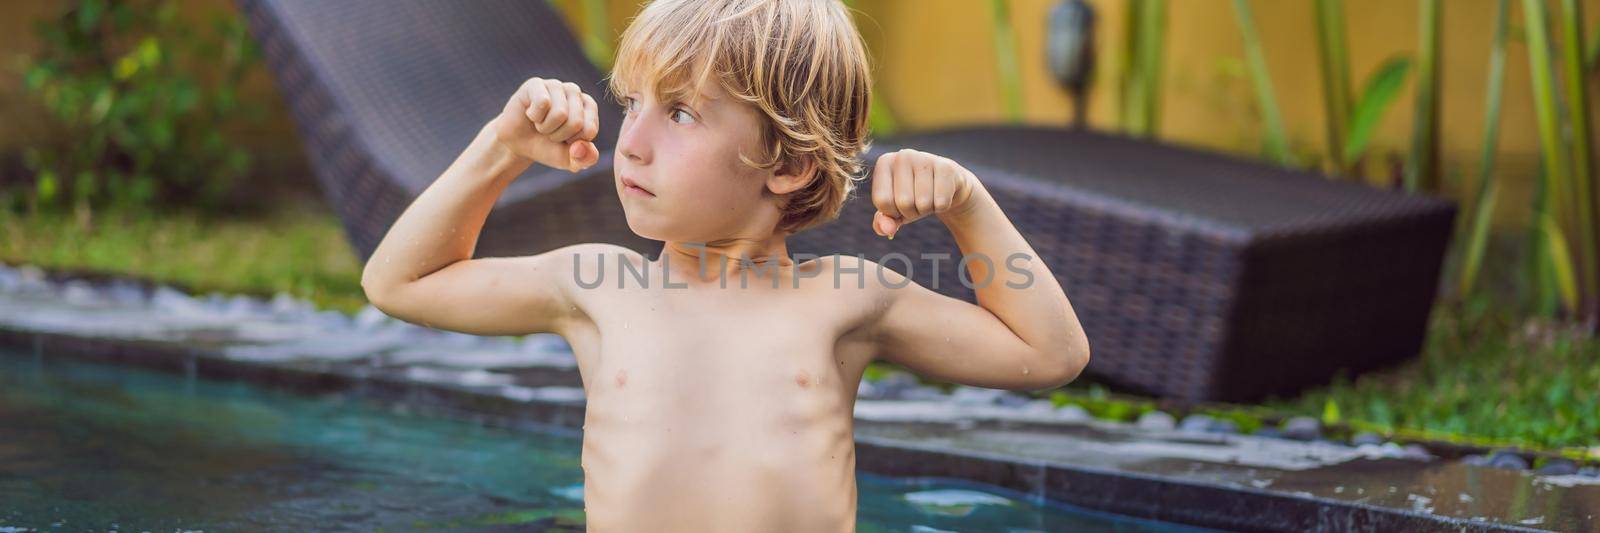 A boy shows his muscles after swimming BANNER, LONG FORMAT by galitskaya